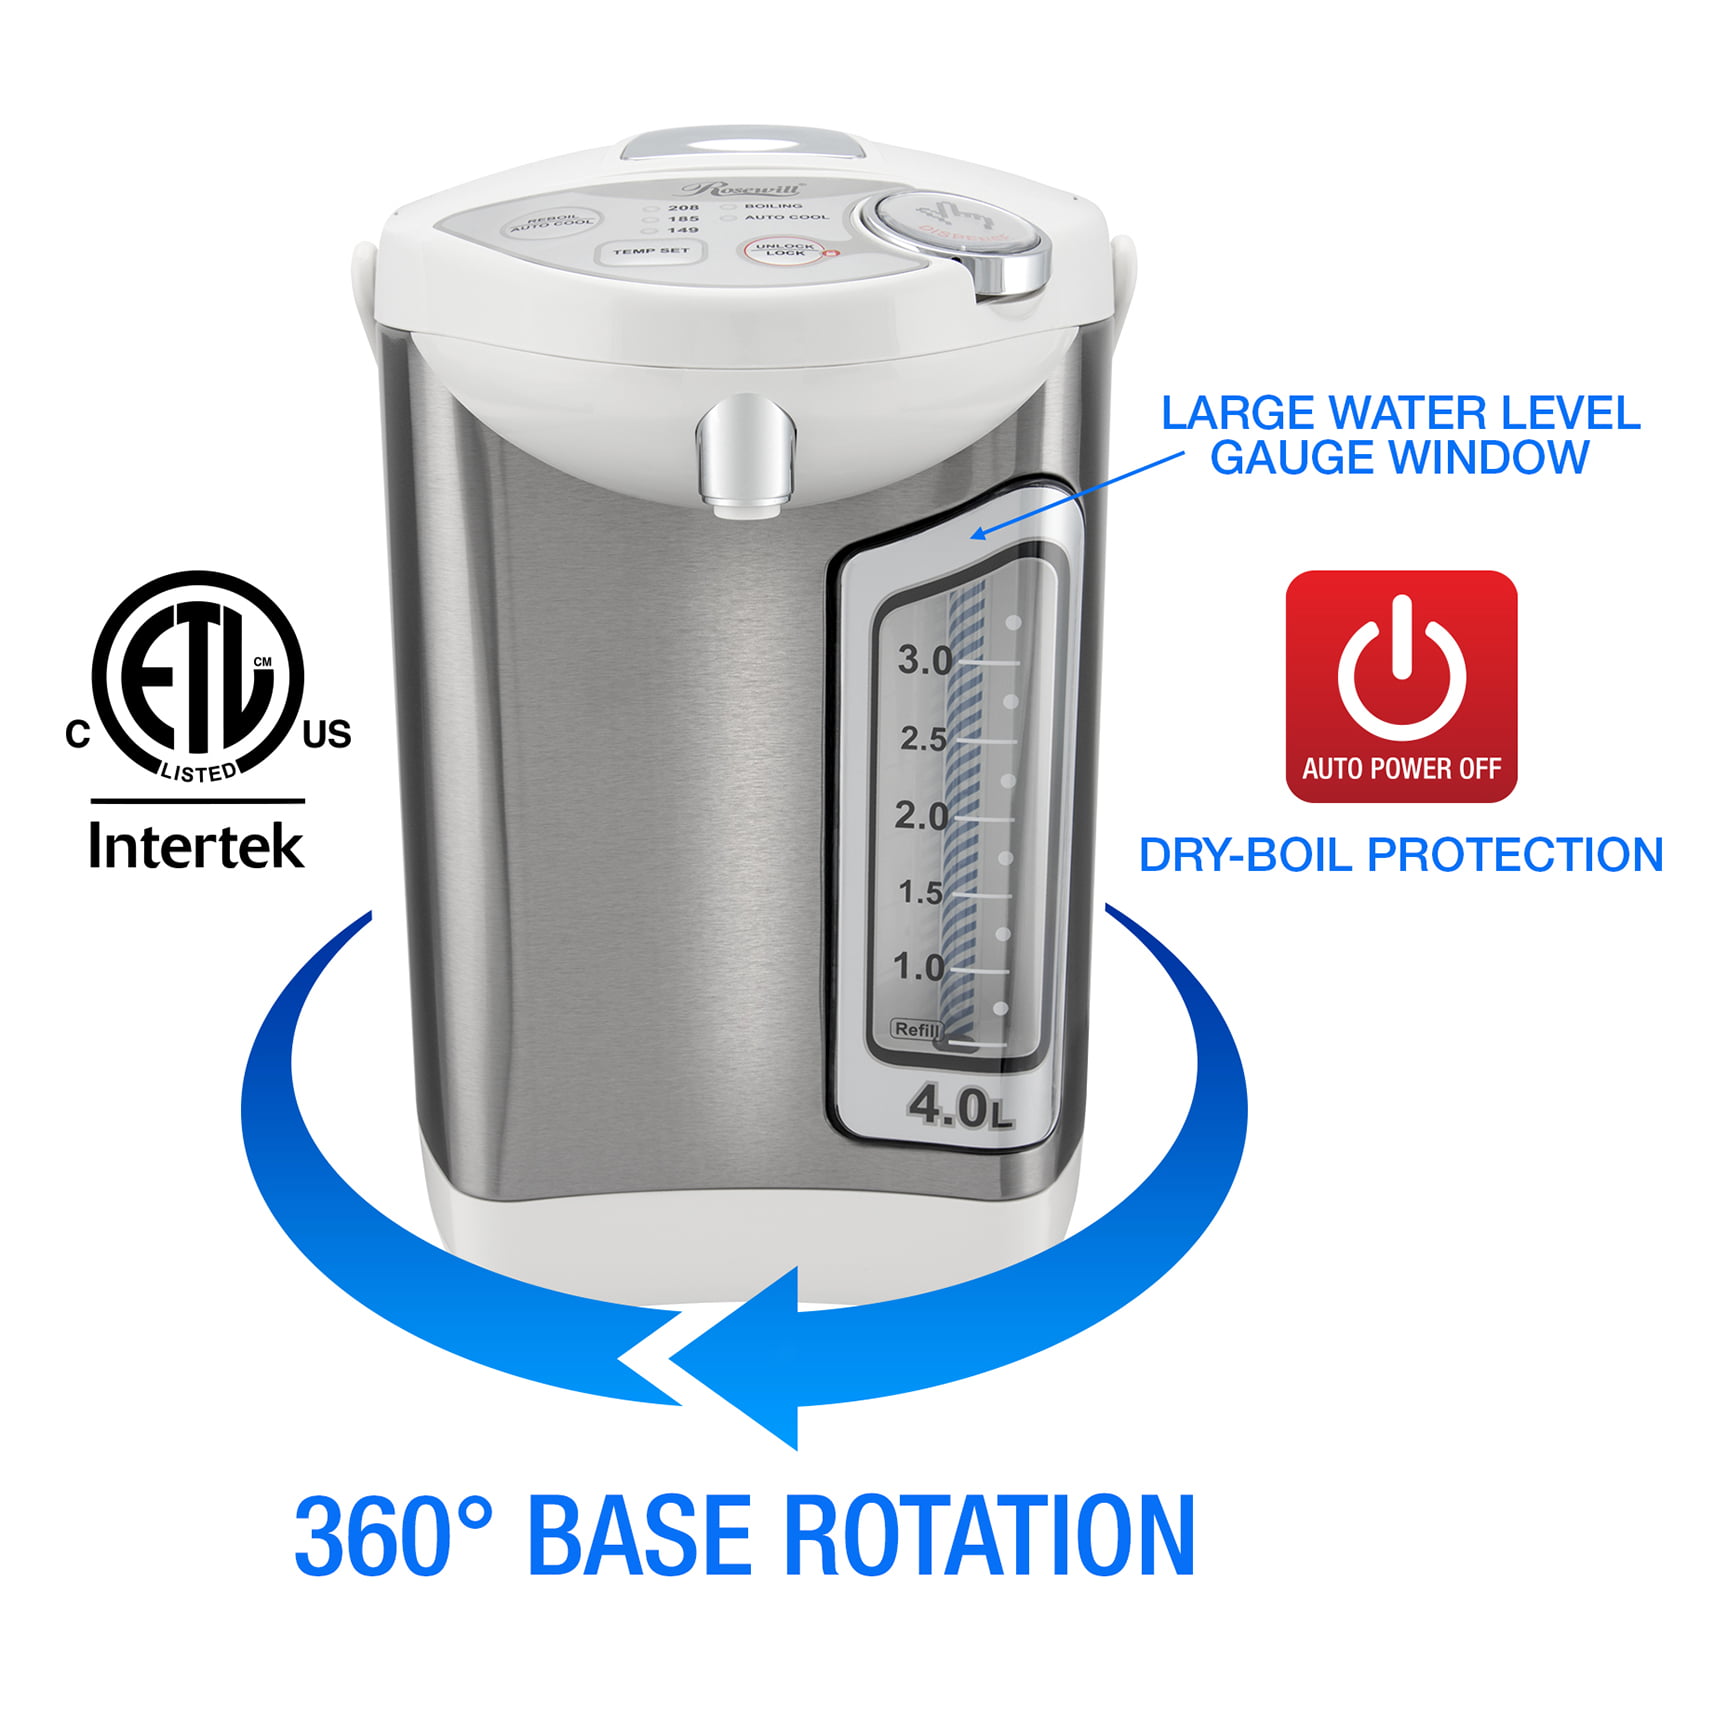 NeweggBusiness - Rosewill Electric Hot Water Boiler and Warmer, Hot Water  Dispenser with Night light, Dual Dispense Speed, Stainless Steel, 4.0-Liter  (1 Gallon), RHAP-16001